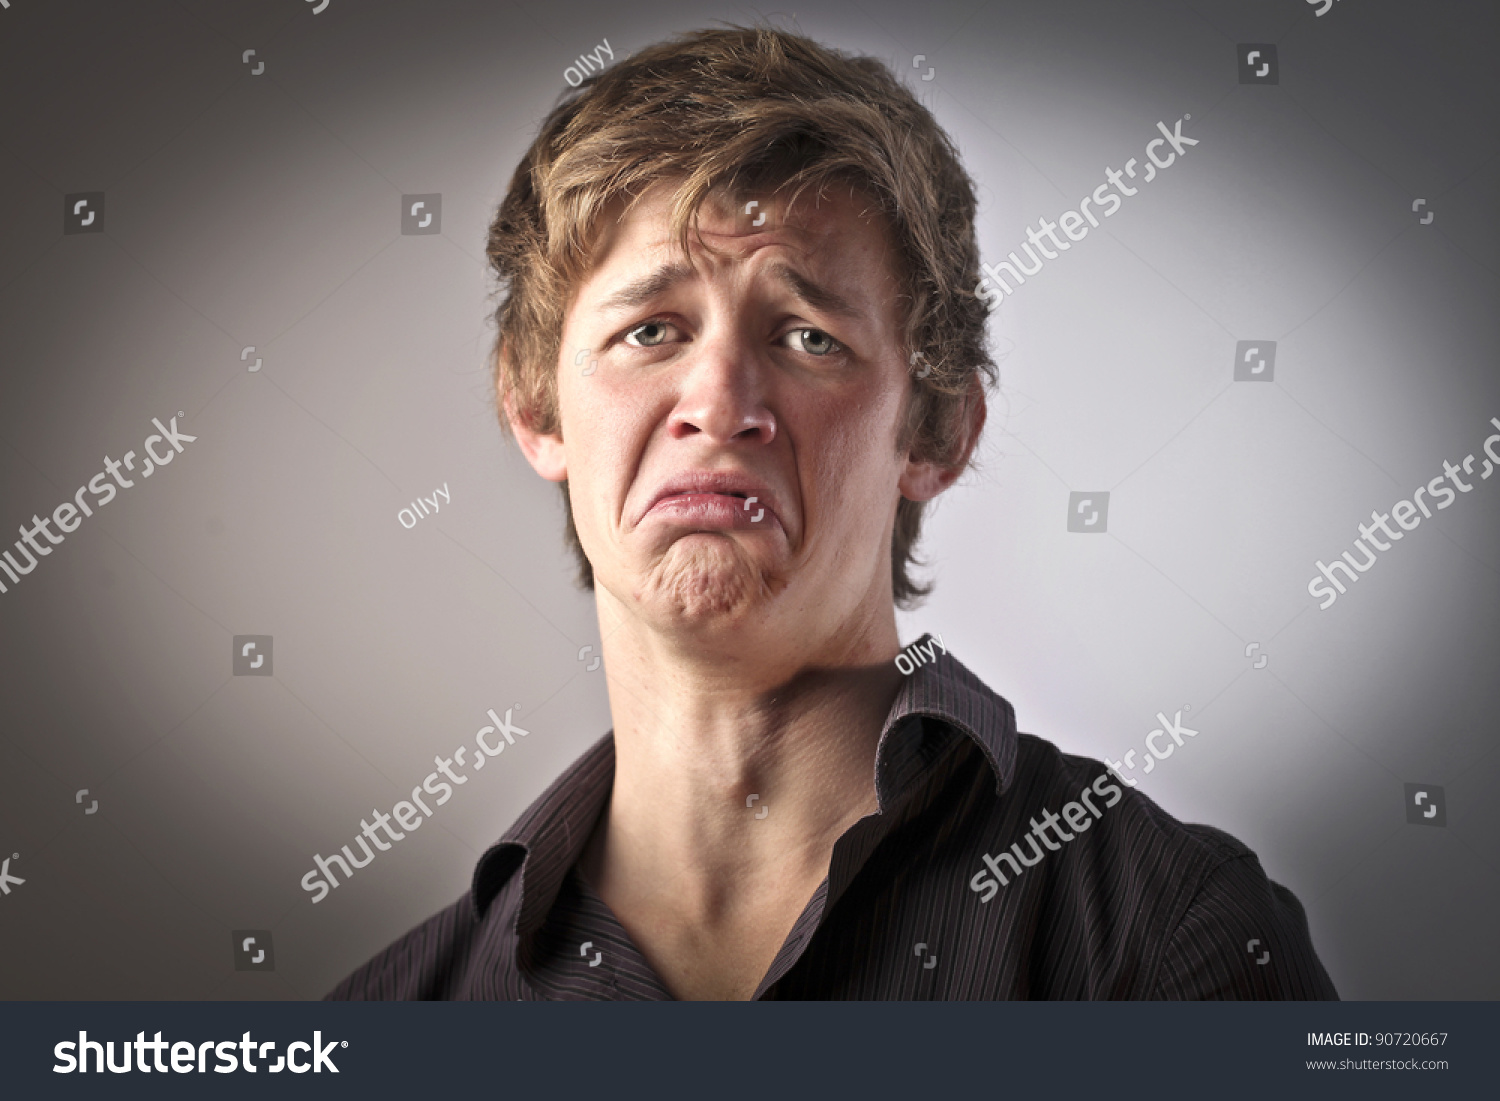 Young Man Sad Expression Stock Photo 90720667 - Shutterstock